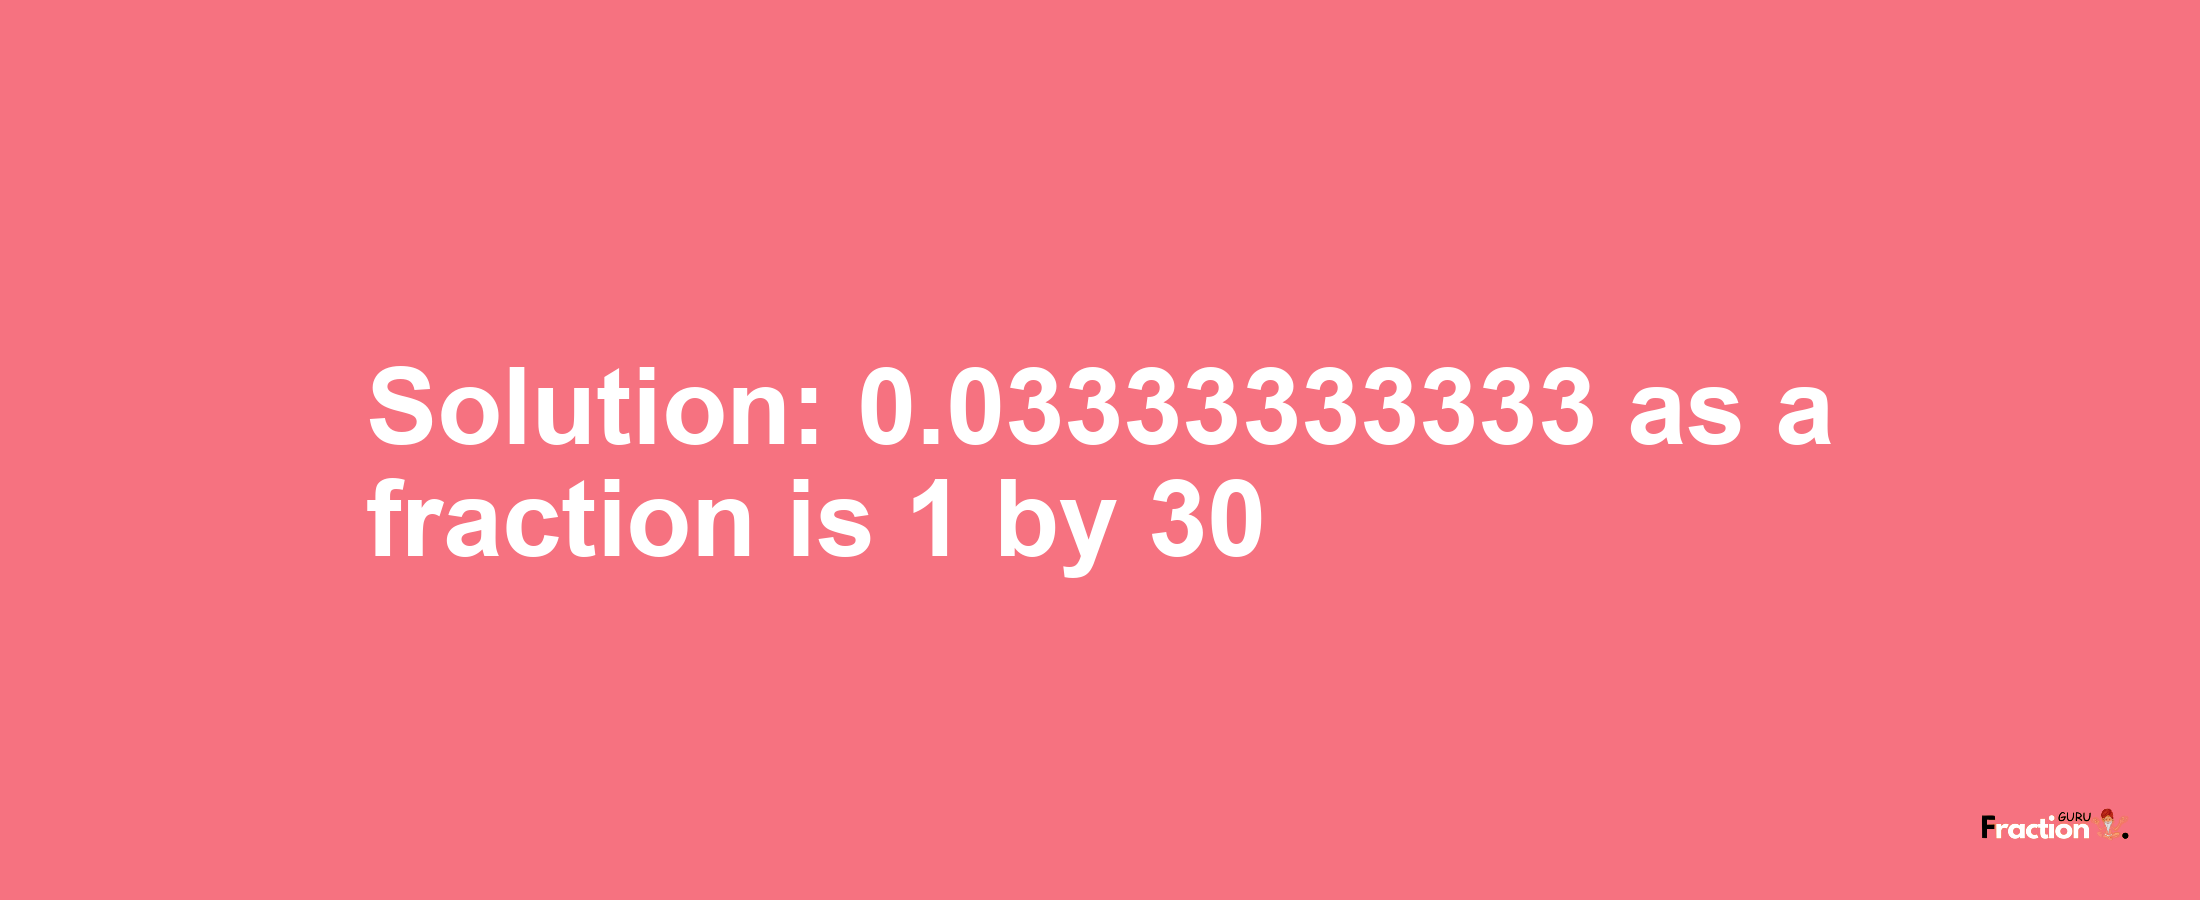 Solution:0.03333333333 as a fraction is 1/30